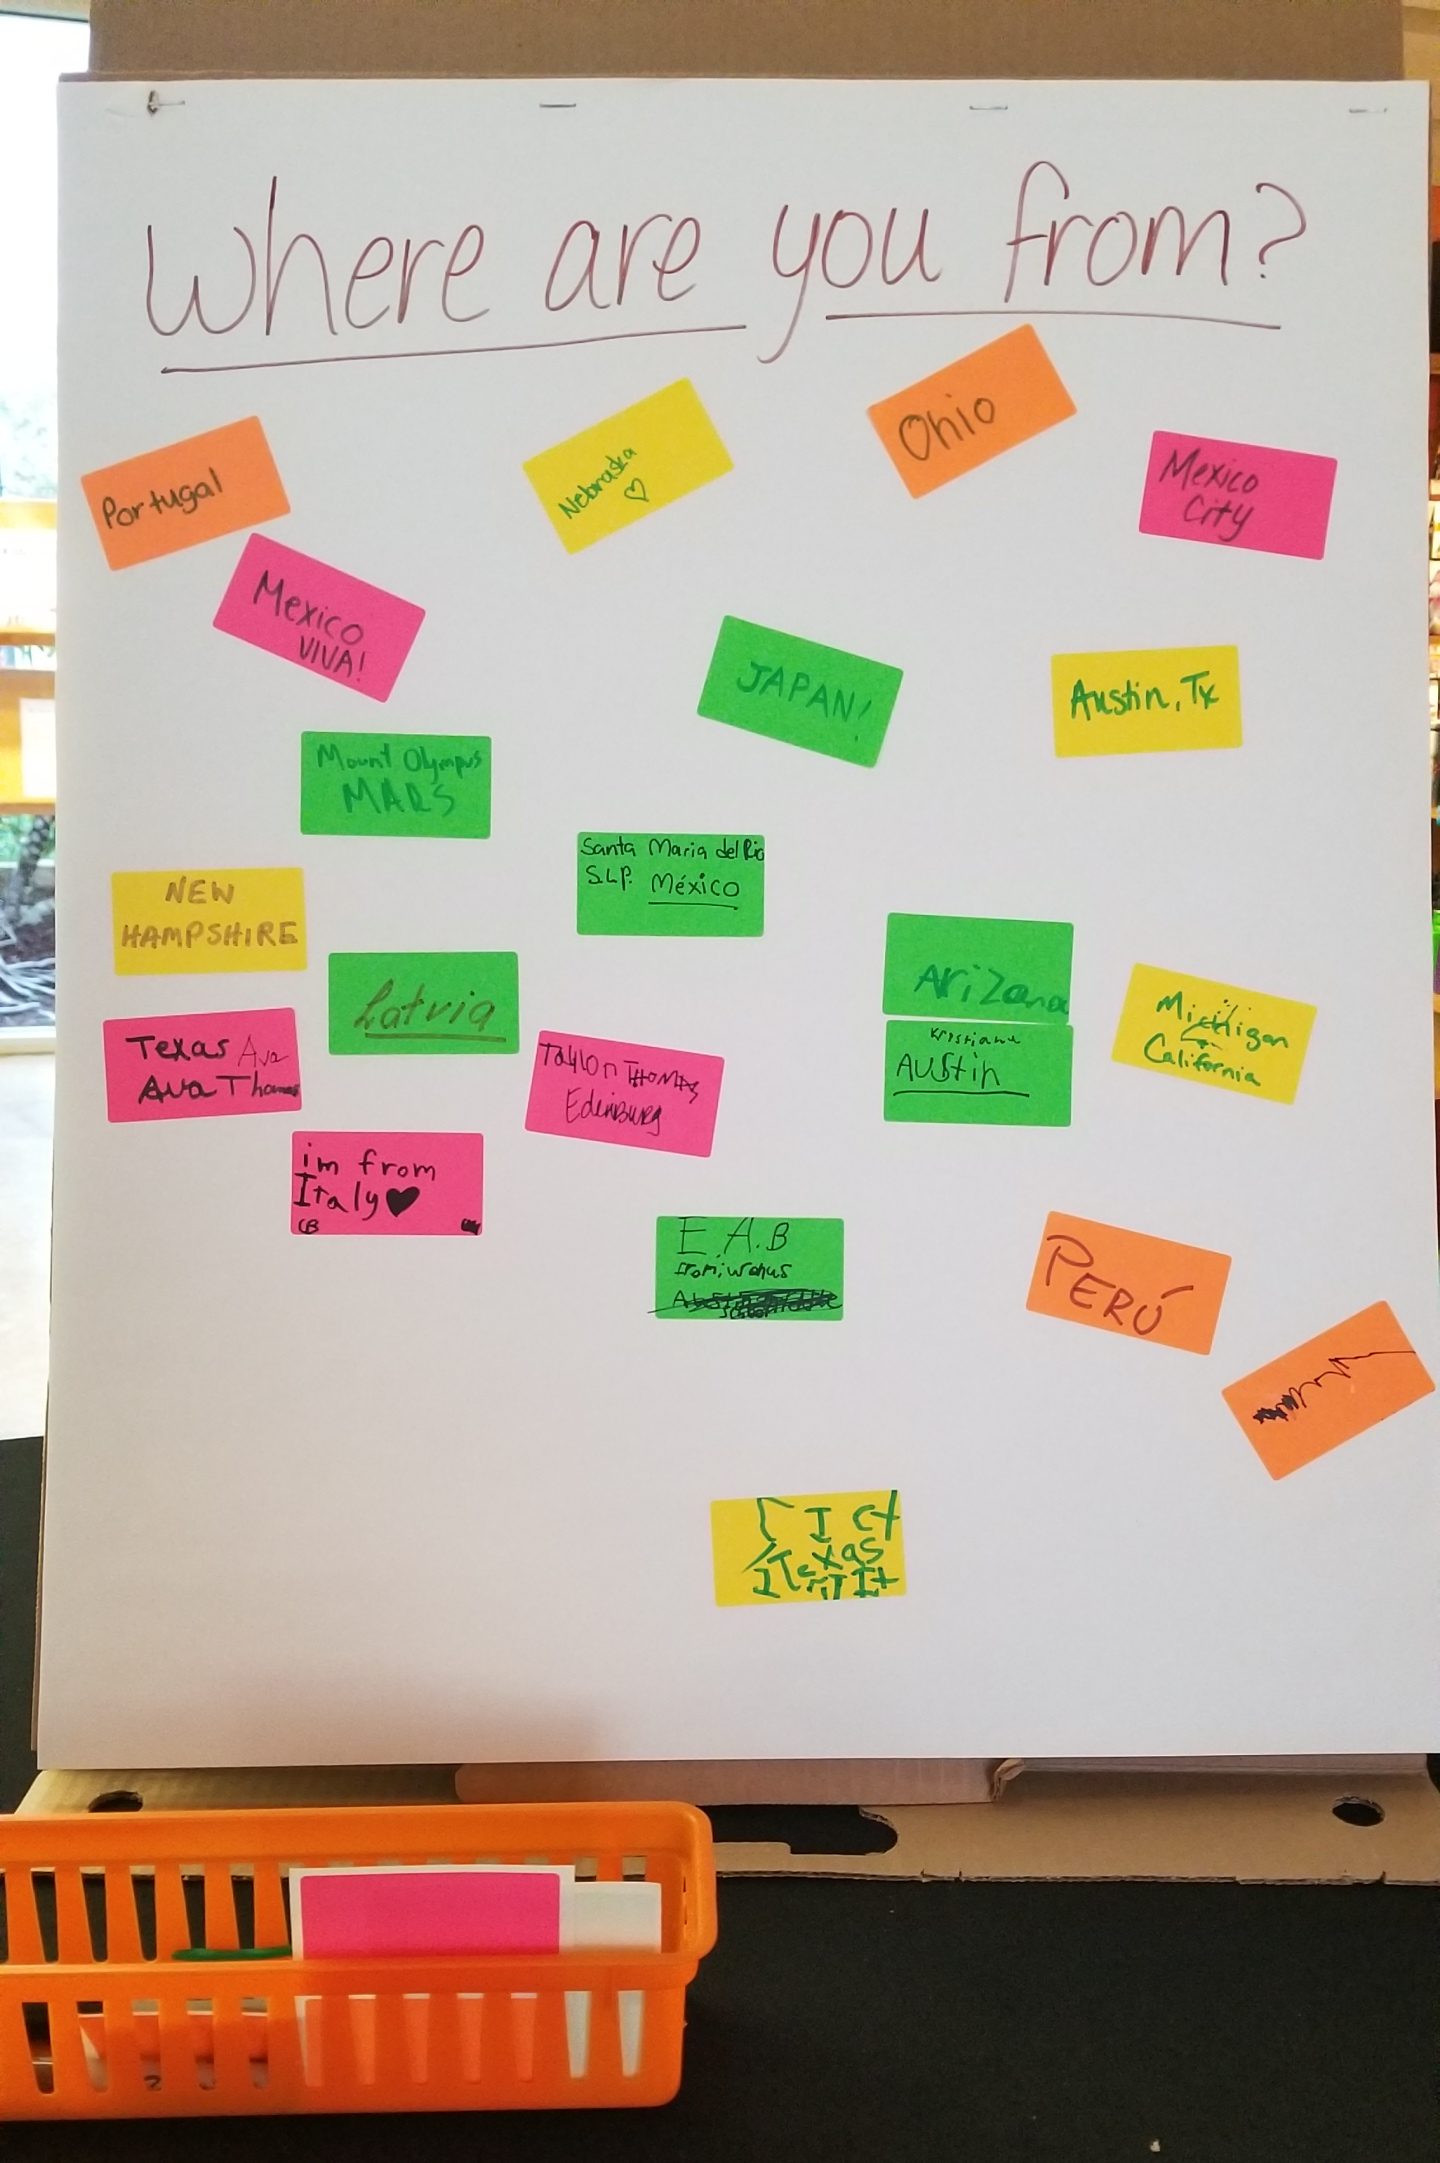 A large sheet of paper with "Where are you from?" written at the top, with colorful sticky notes below that say answers like "Portugal," 'Nebraska," "Ohio," "Mexico City," "Mexico / VIVA!," "JAPAN!," and "Austin, Tx."